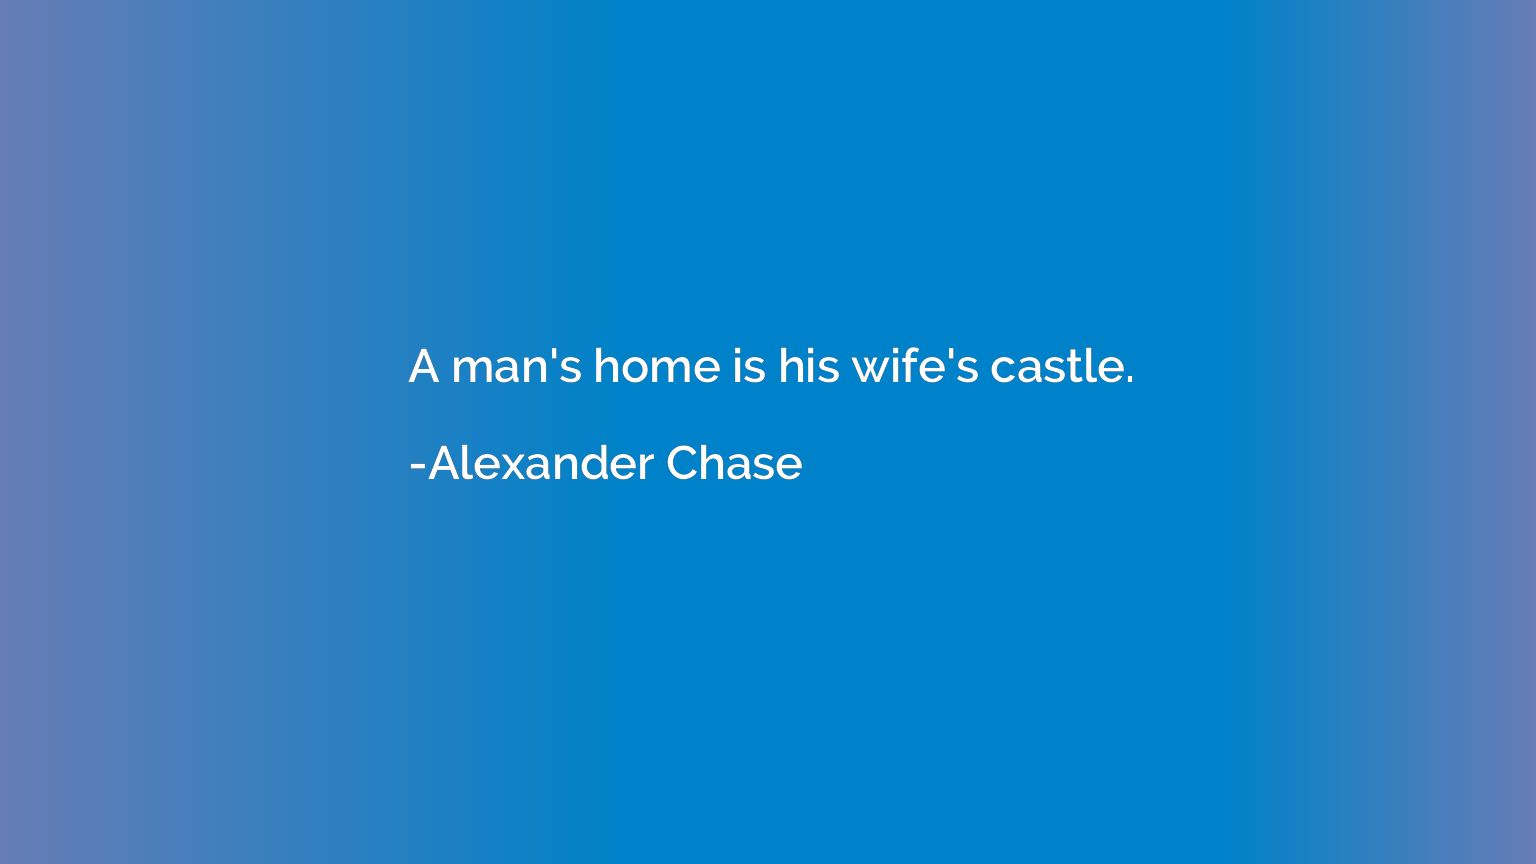 A man's home is his wife's castle.